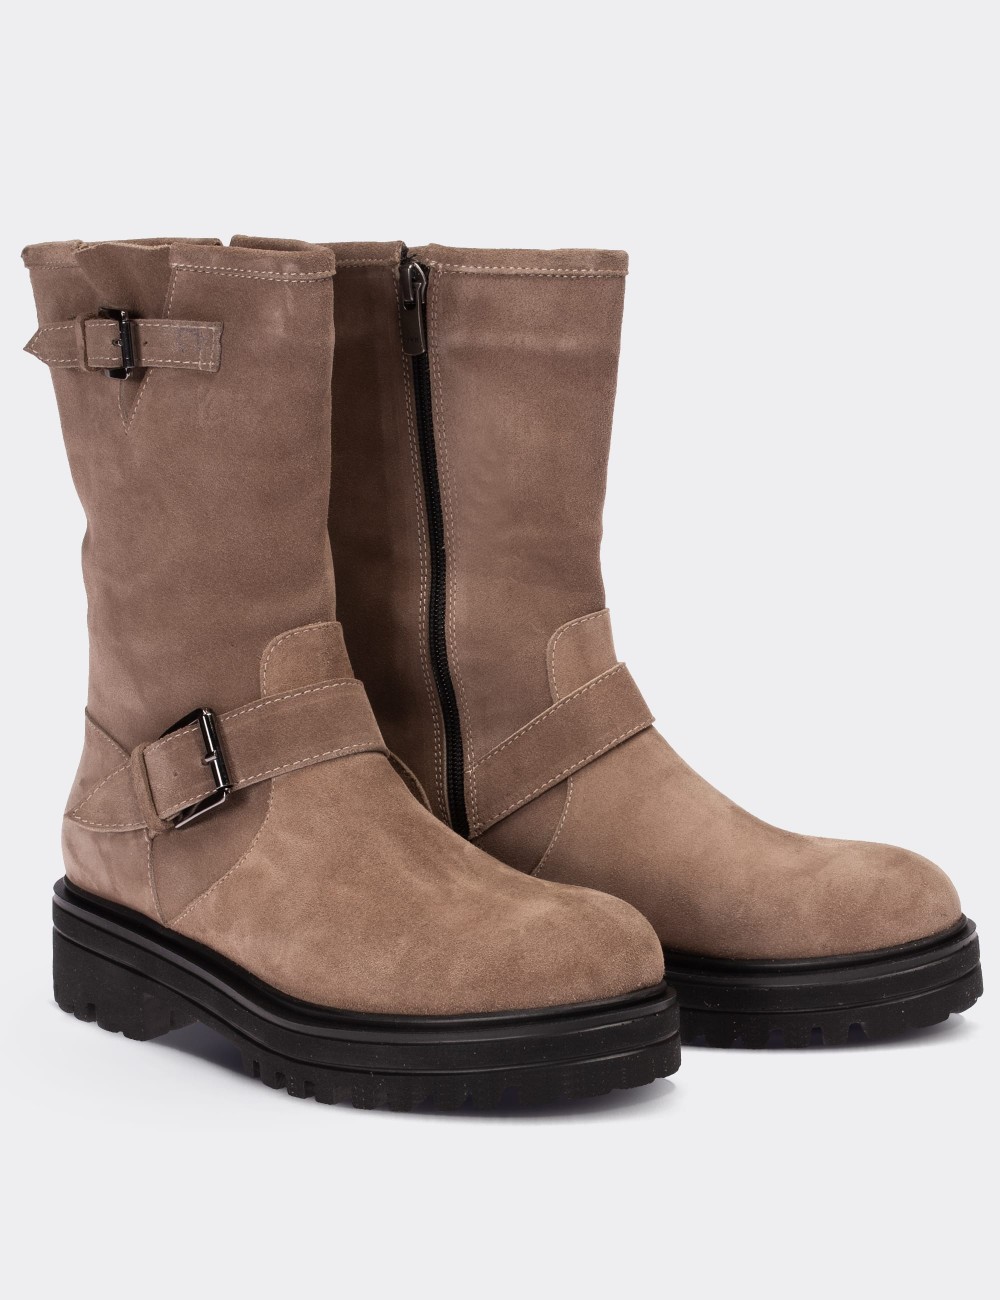 Sandstone Suede Leather Boots - 01805ZVZNE01